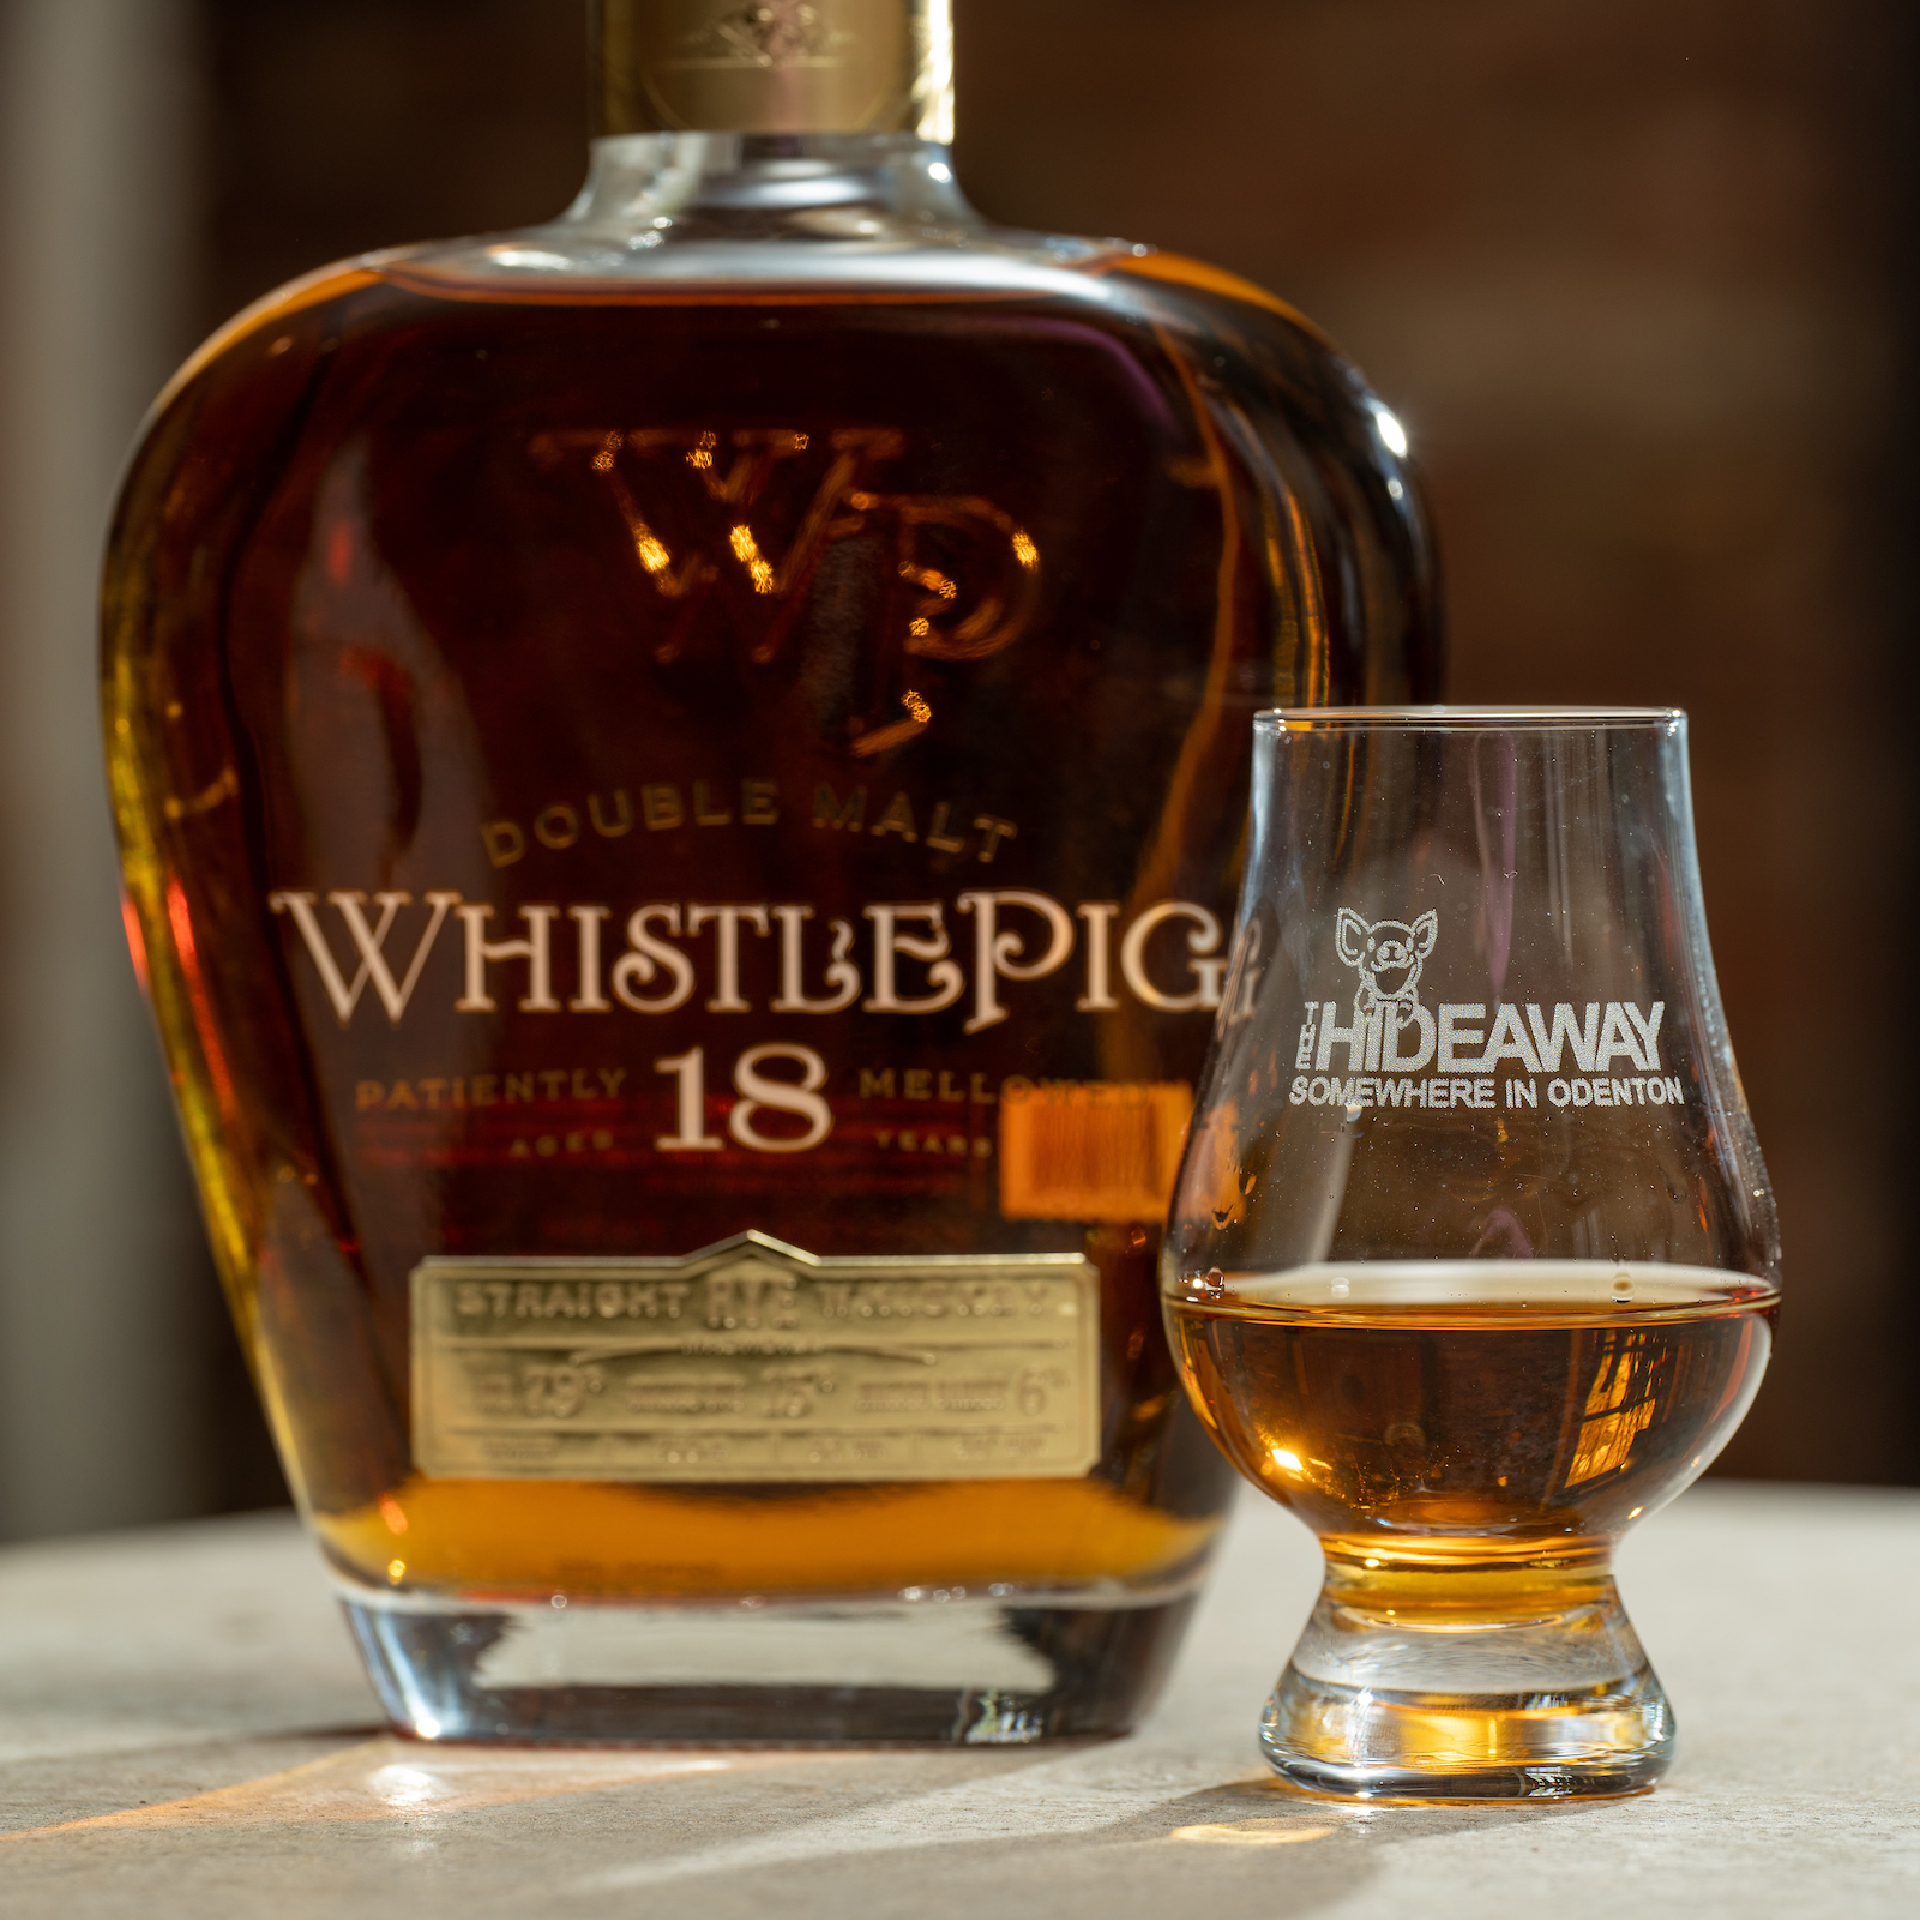 a bottle of Whistlepig whiskey